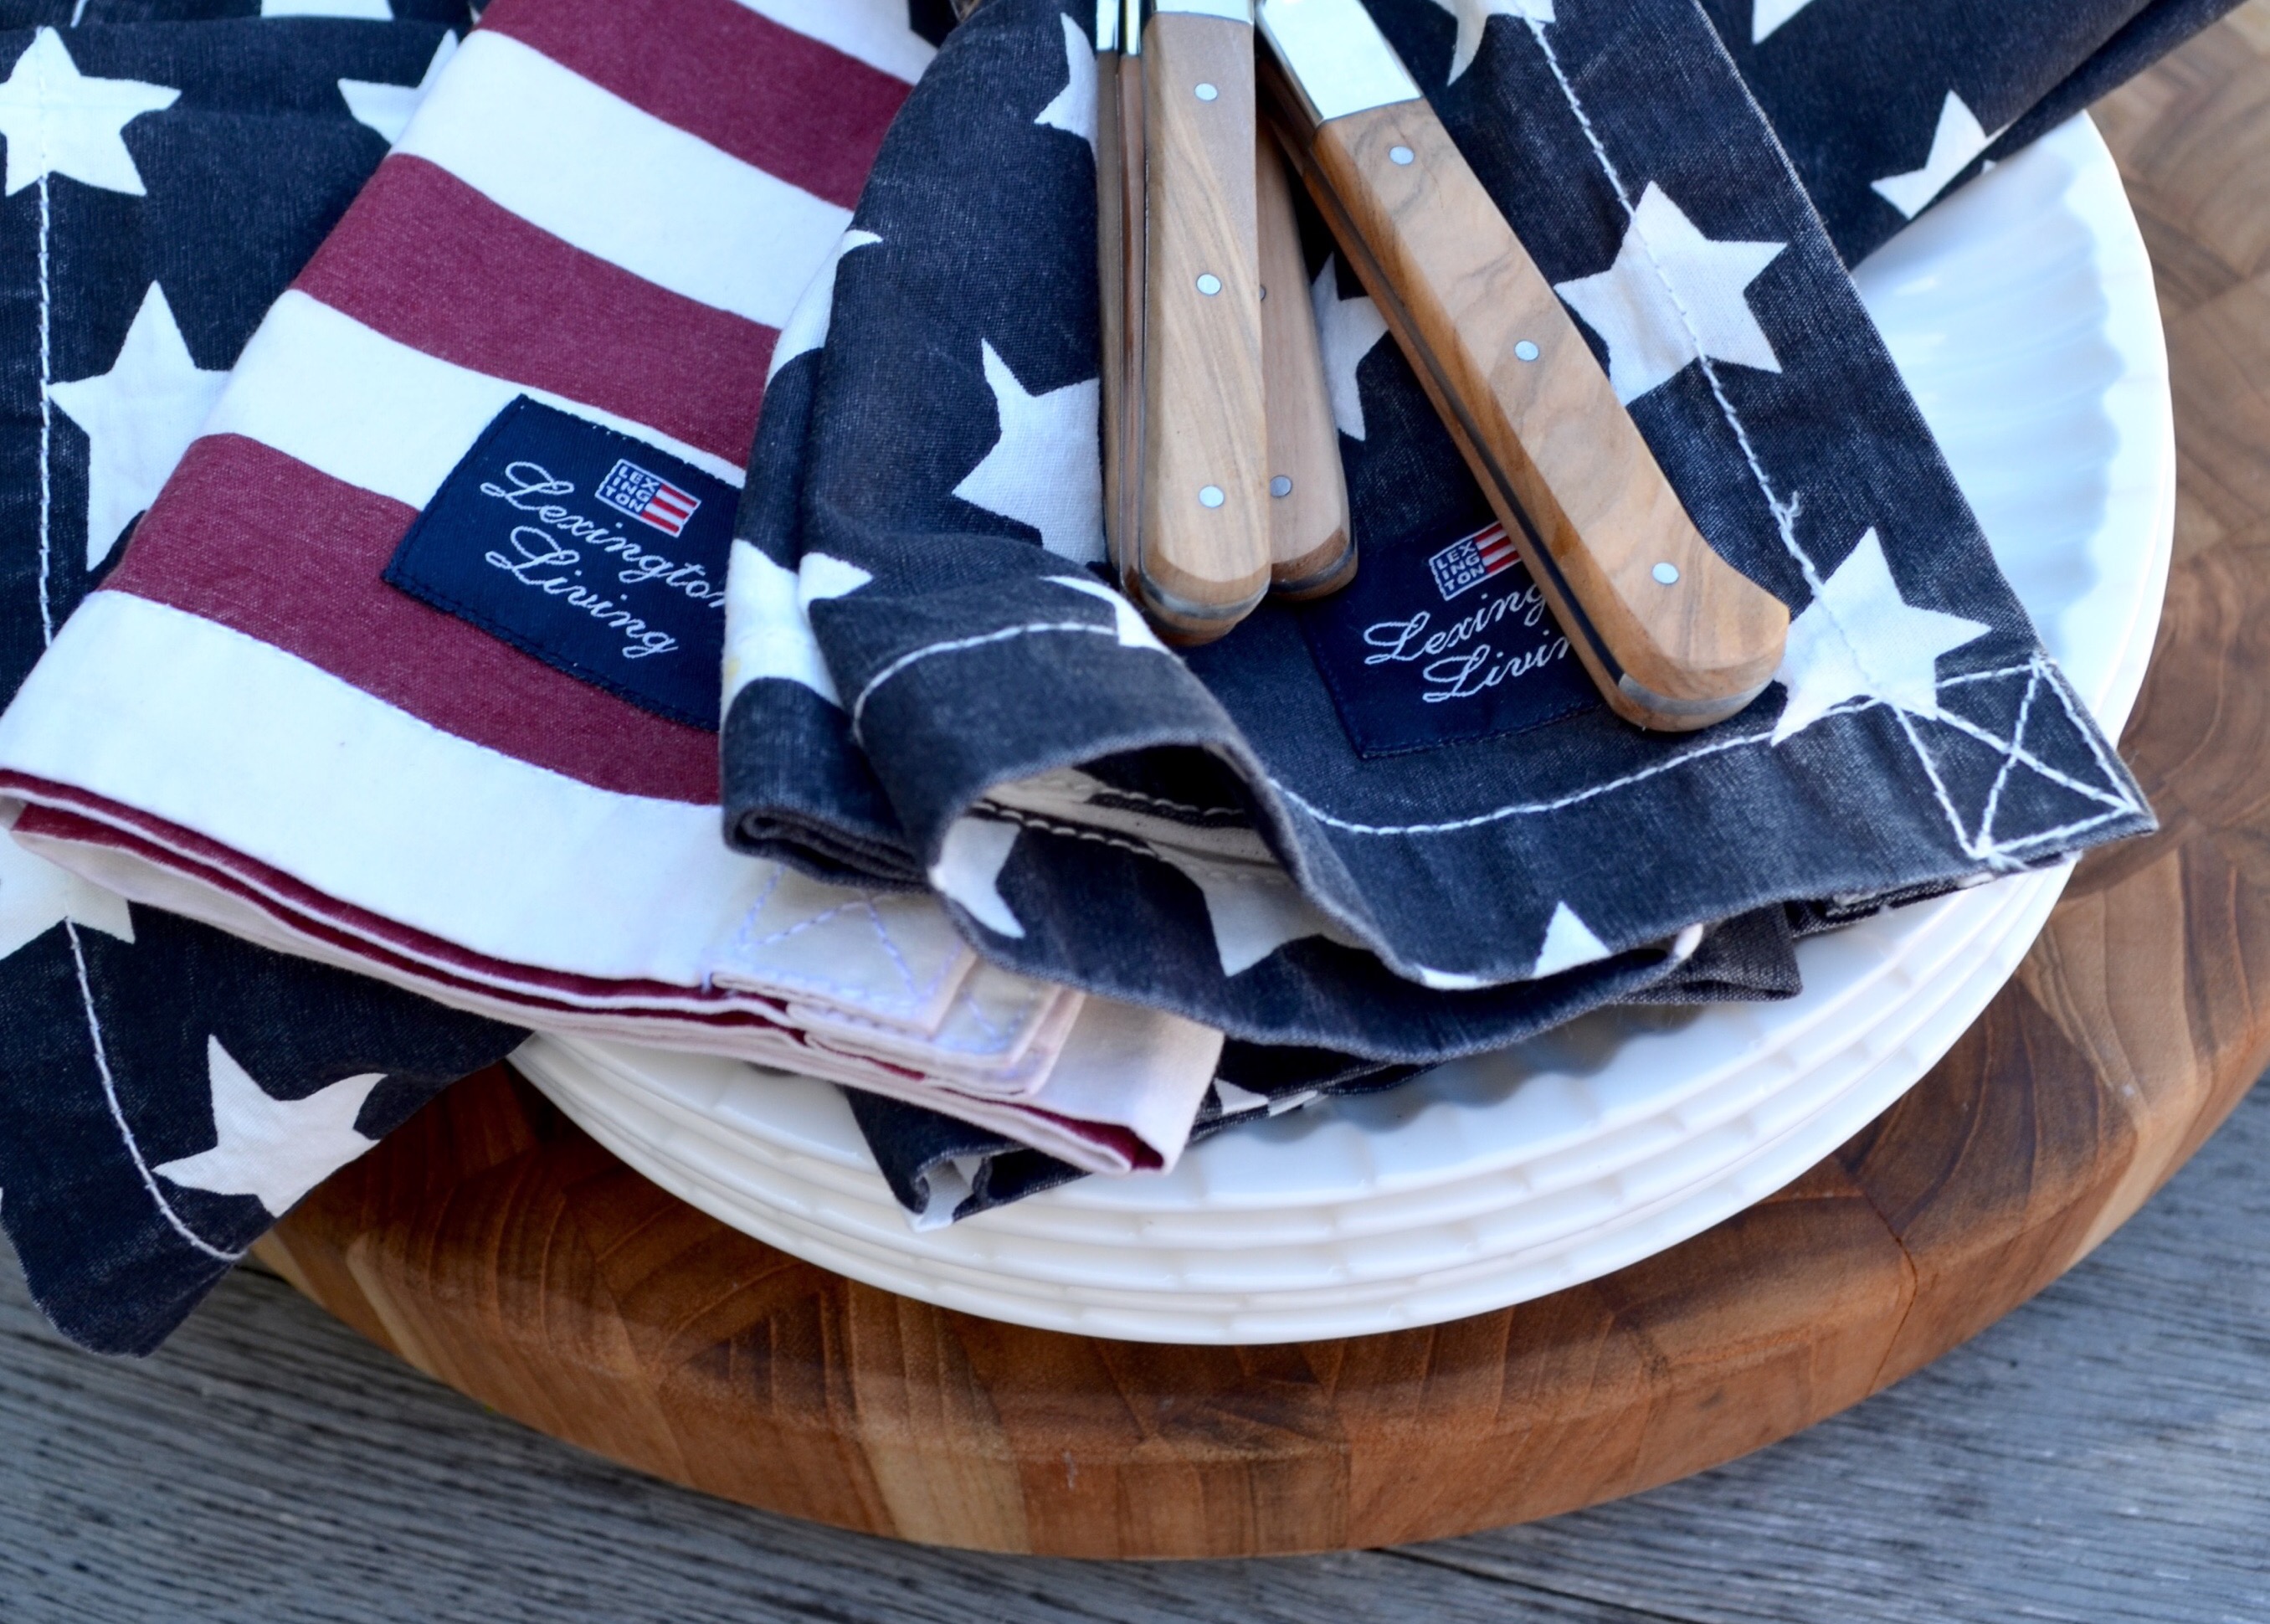 Celebrate 4th of July with This Patriotic Table Setting